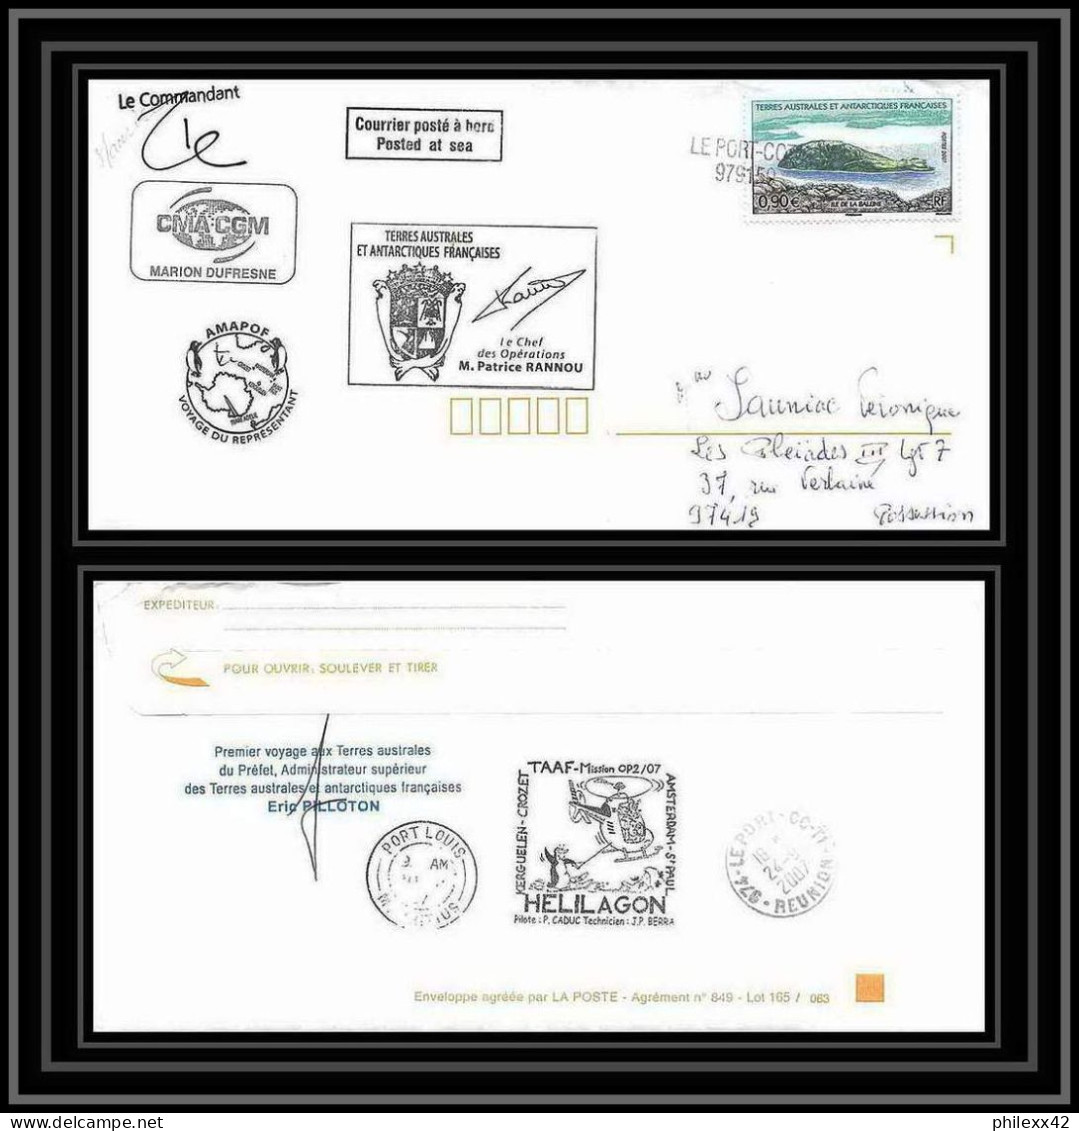 2716 ANTARCTIC Terres Australes (taaf) Dufresne 2 Signé Signed Op 2007/2 Maurice (mauritus) Helilagon Voyage Pilloton - Expediciones Antárticas